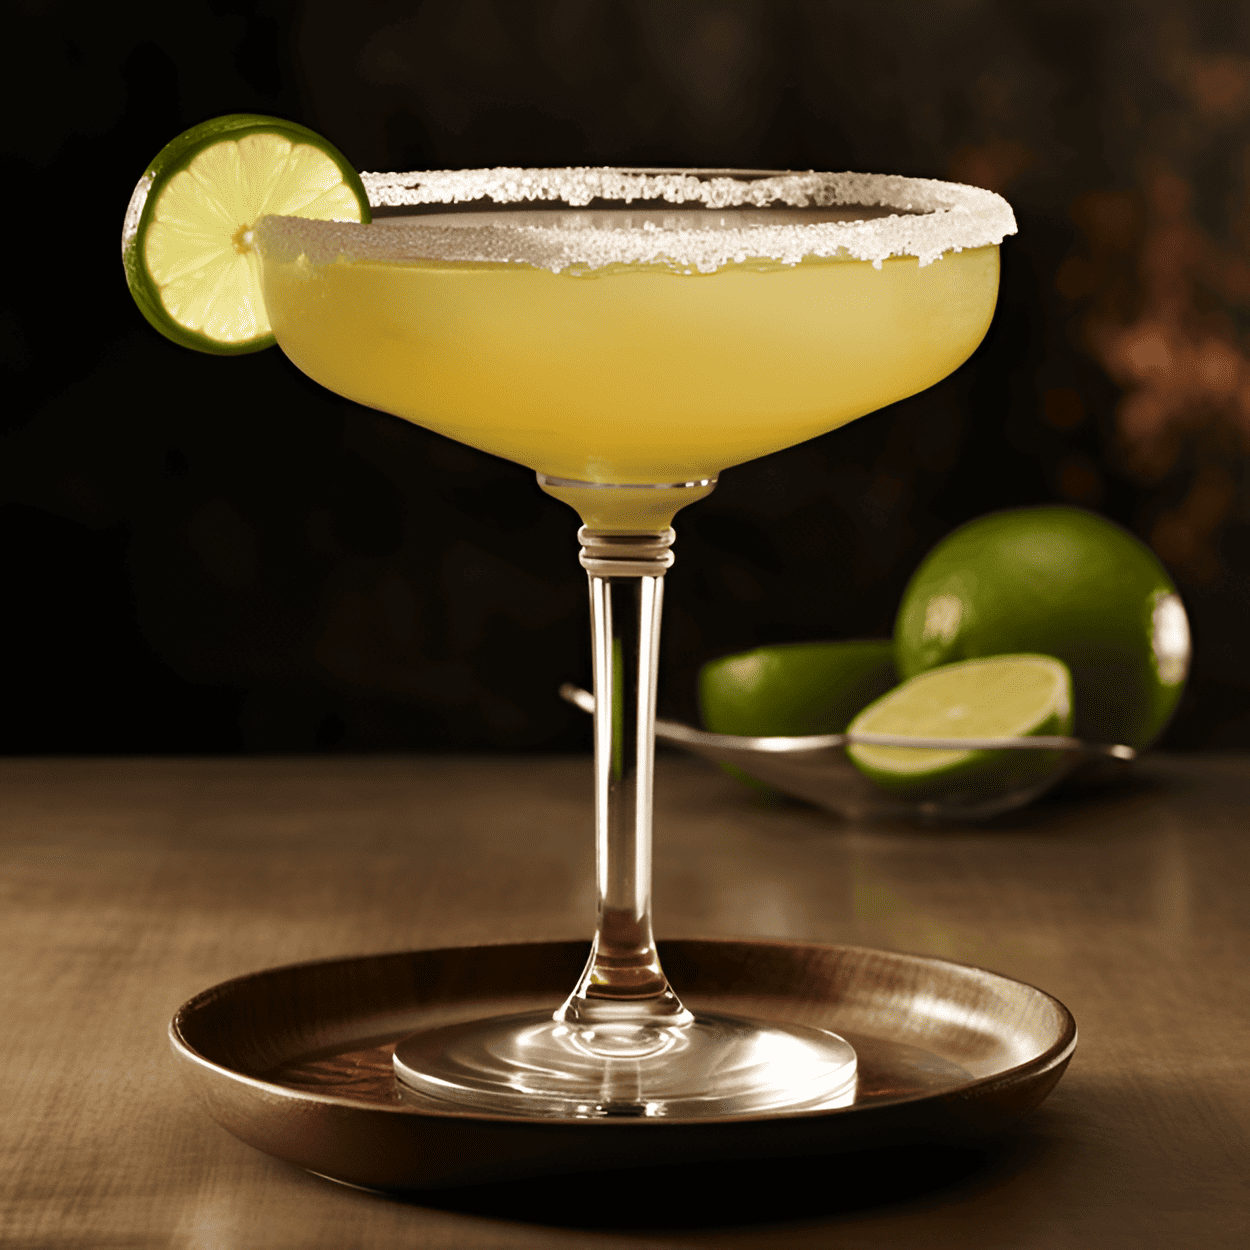 Hennessy Margarita Cocktail Recipe - The Hennessy Margarita is a complex blend of sweet, sour, and strong. The sweetness of the Hennessy pairs perfectly with the sourness of the lime, while the strength of the cognac gives the cocktail a robust and full-bodied flavor.